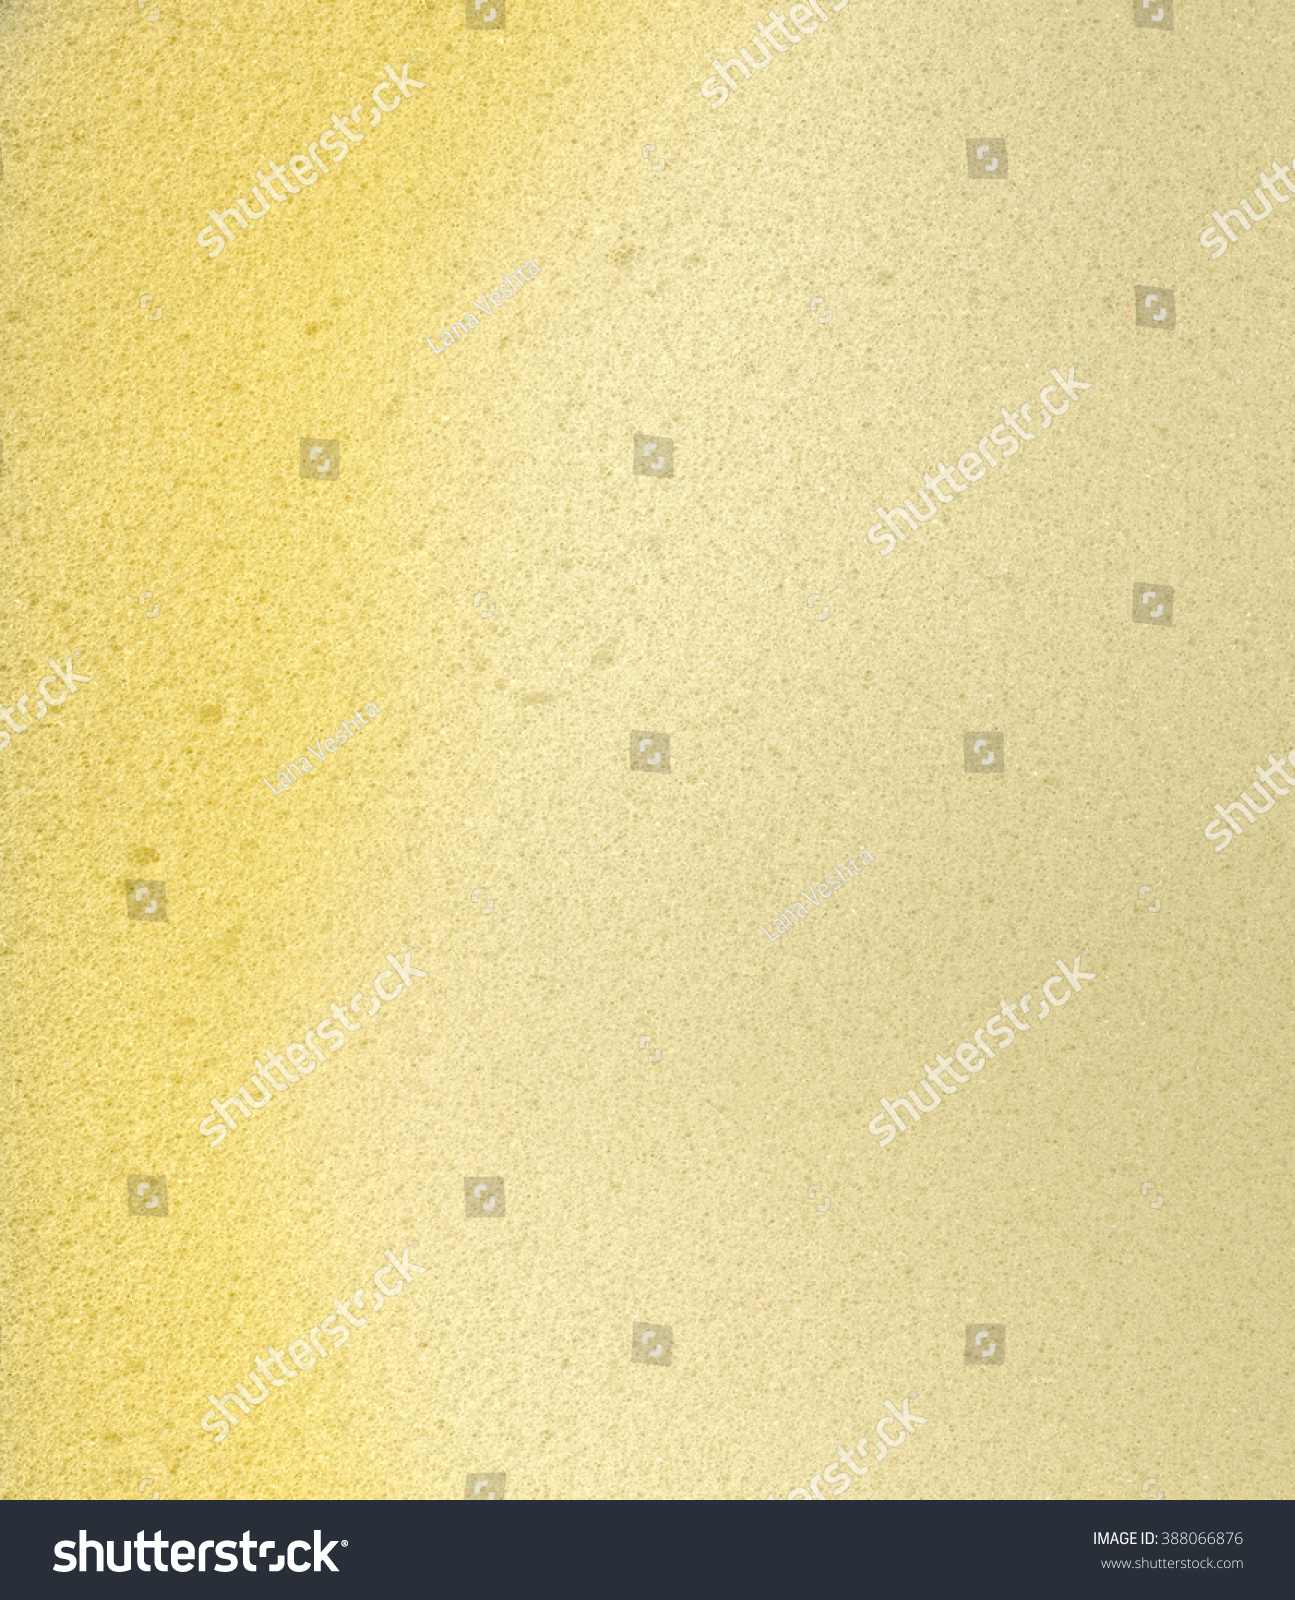 Background Texture Foam Rubber Stock Photo (100% Legal Protection ...